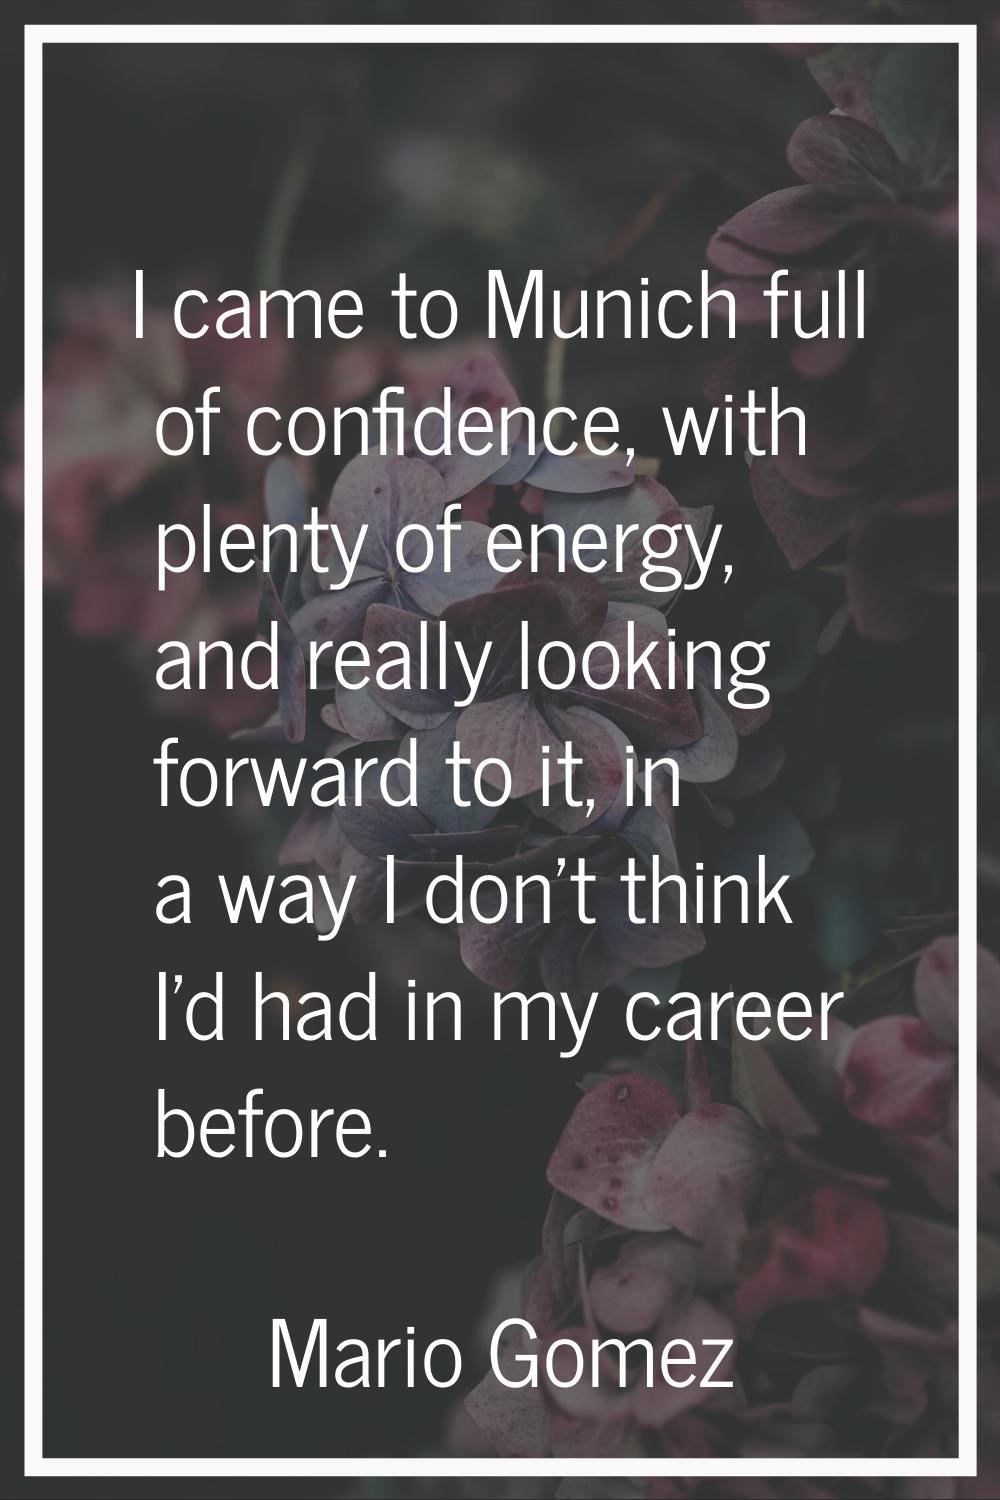 I came to Munich full of confidence, with plenty of energy, and really looking forward to it, in a 